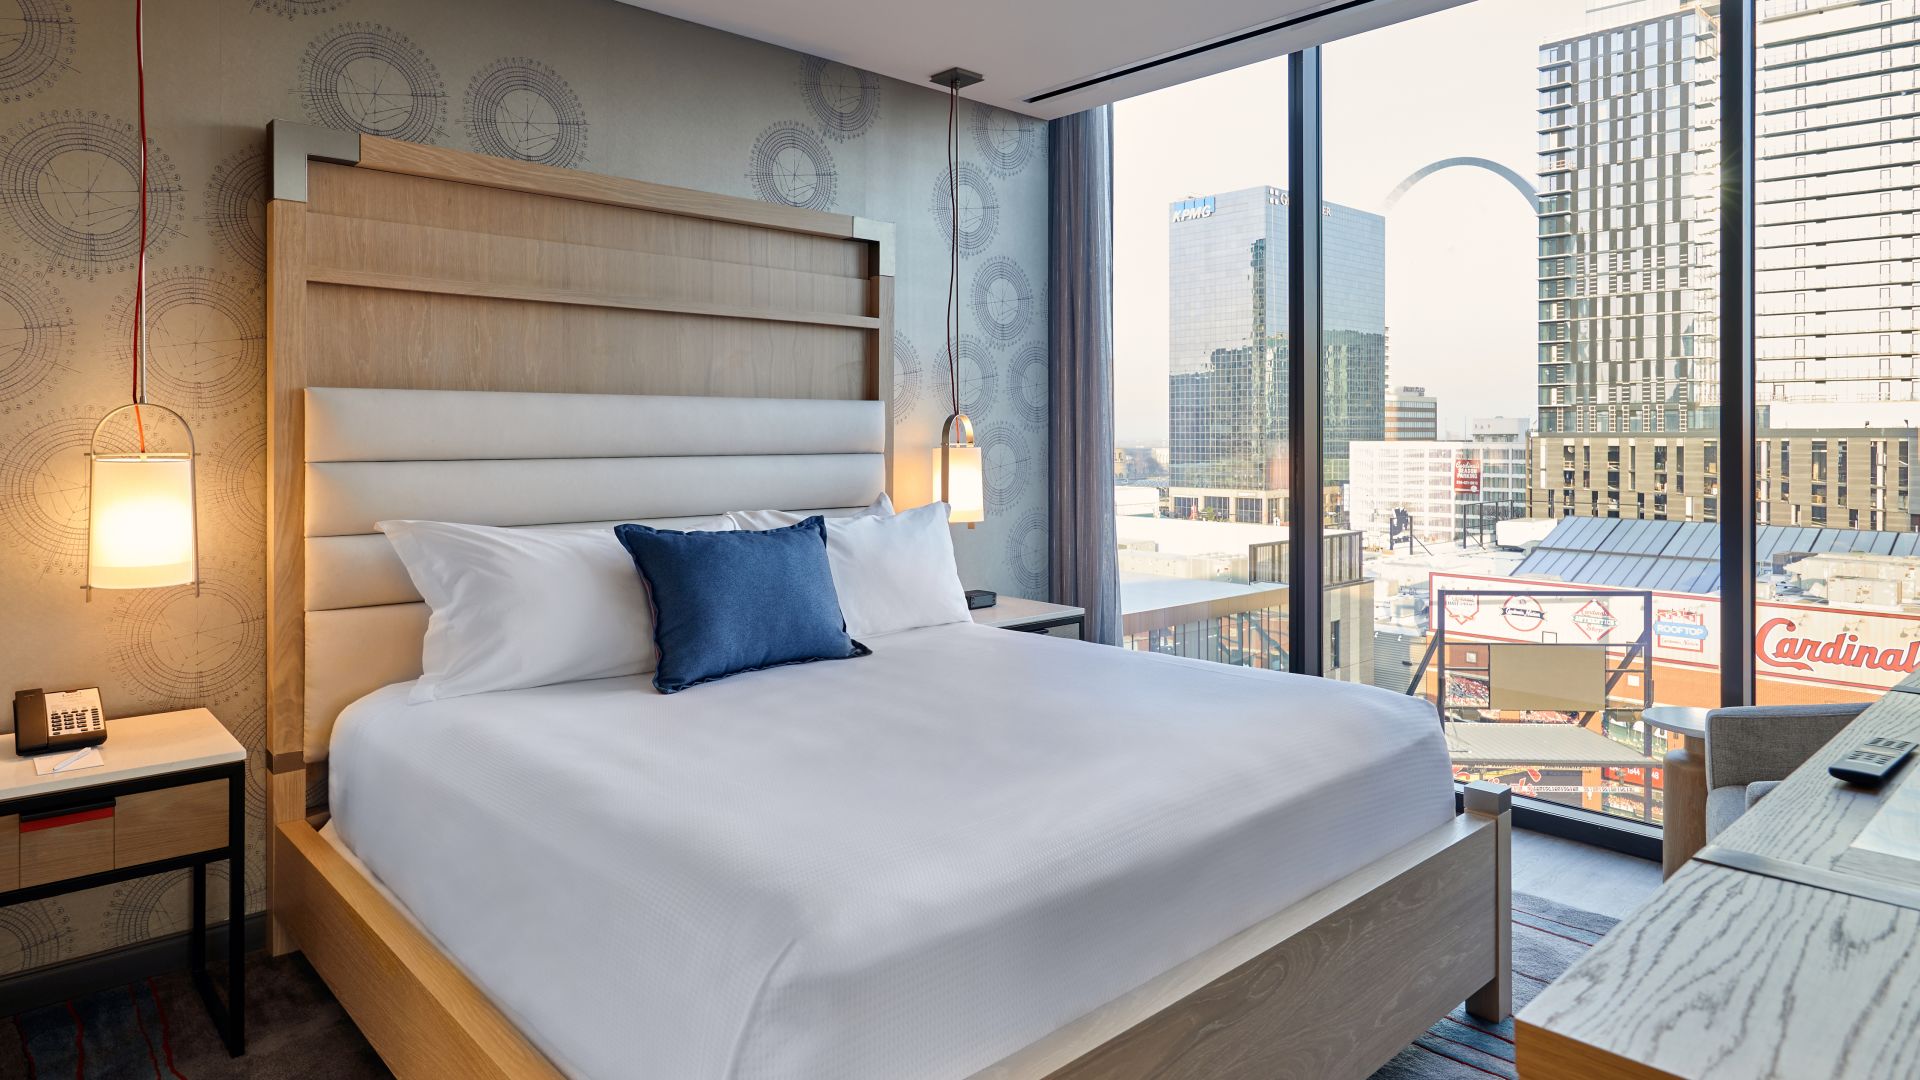 Live! By Loews gives guests unbeatable views of Busch Stadium, the Gateway Arch and downtown St. Louis.